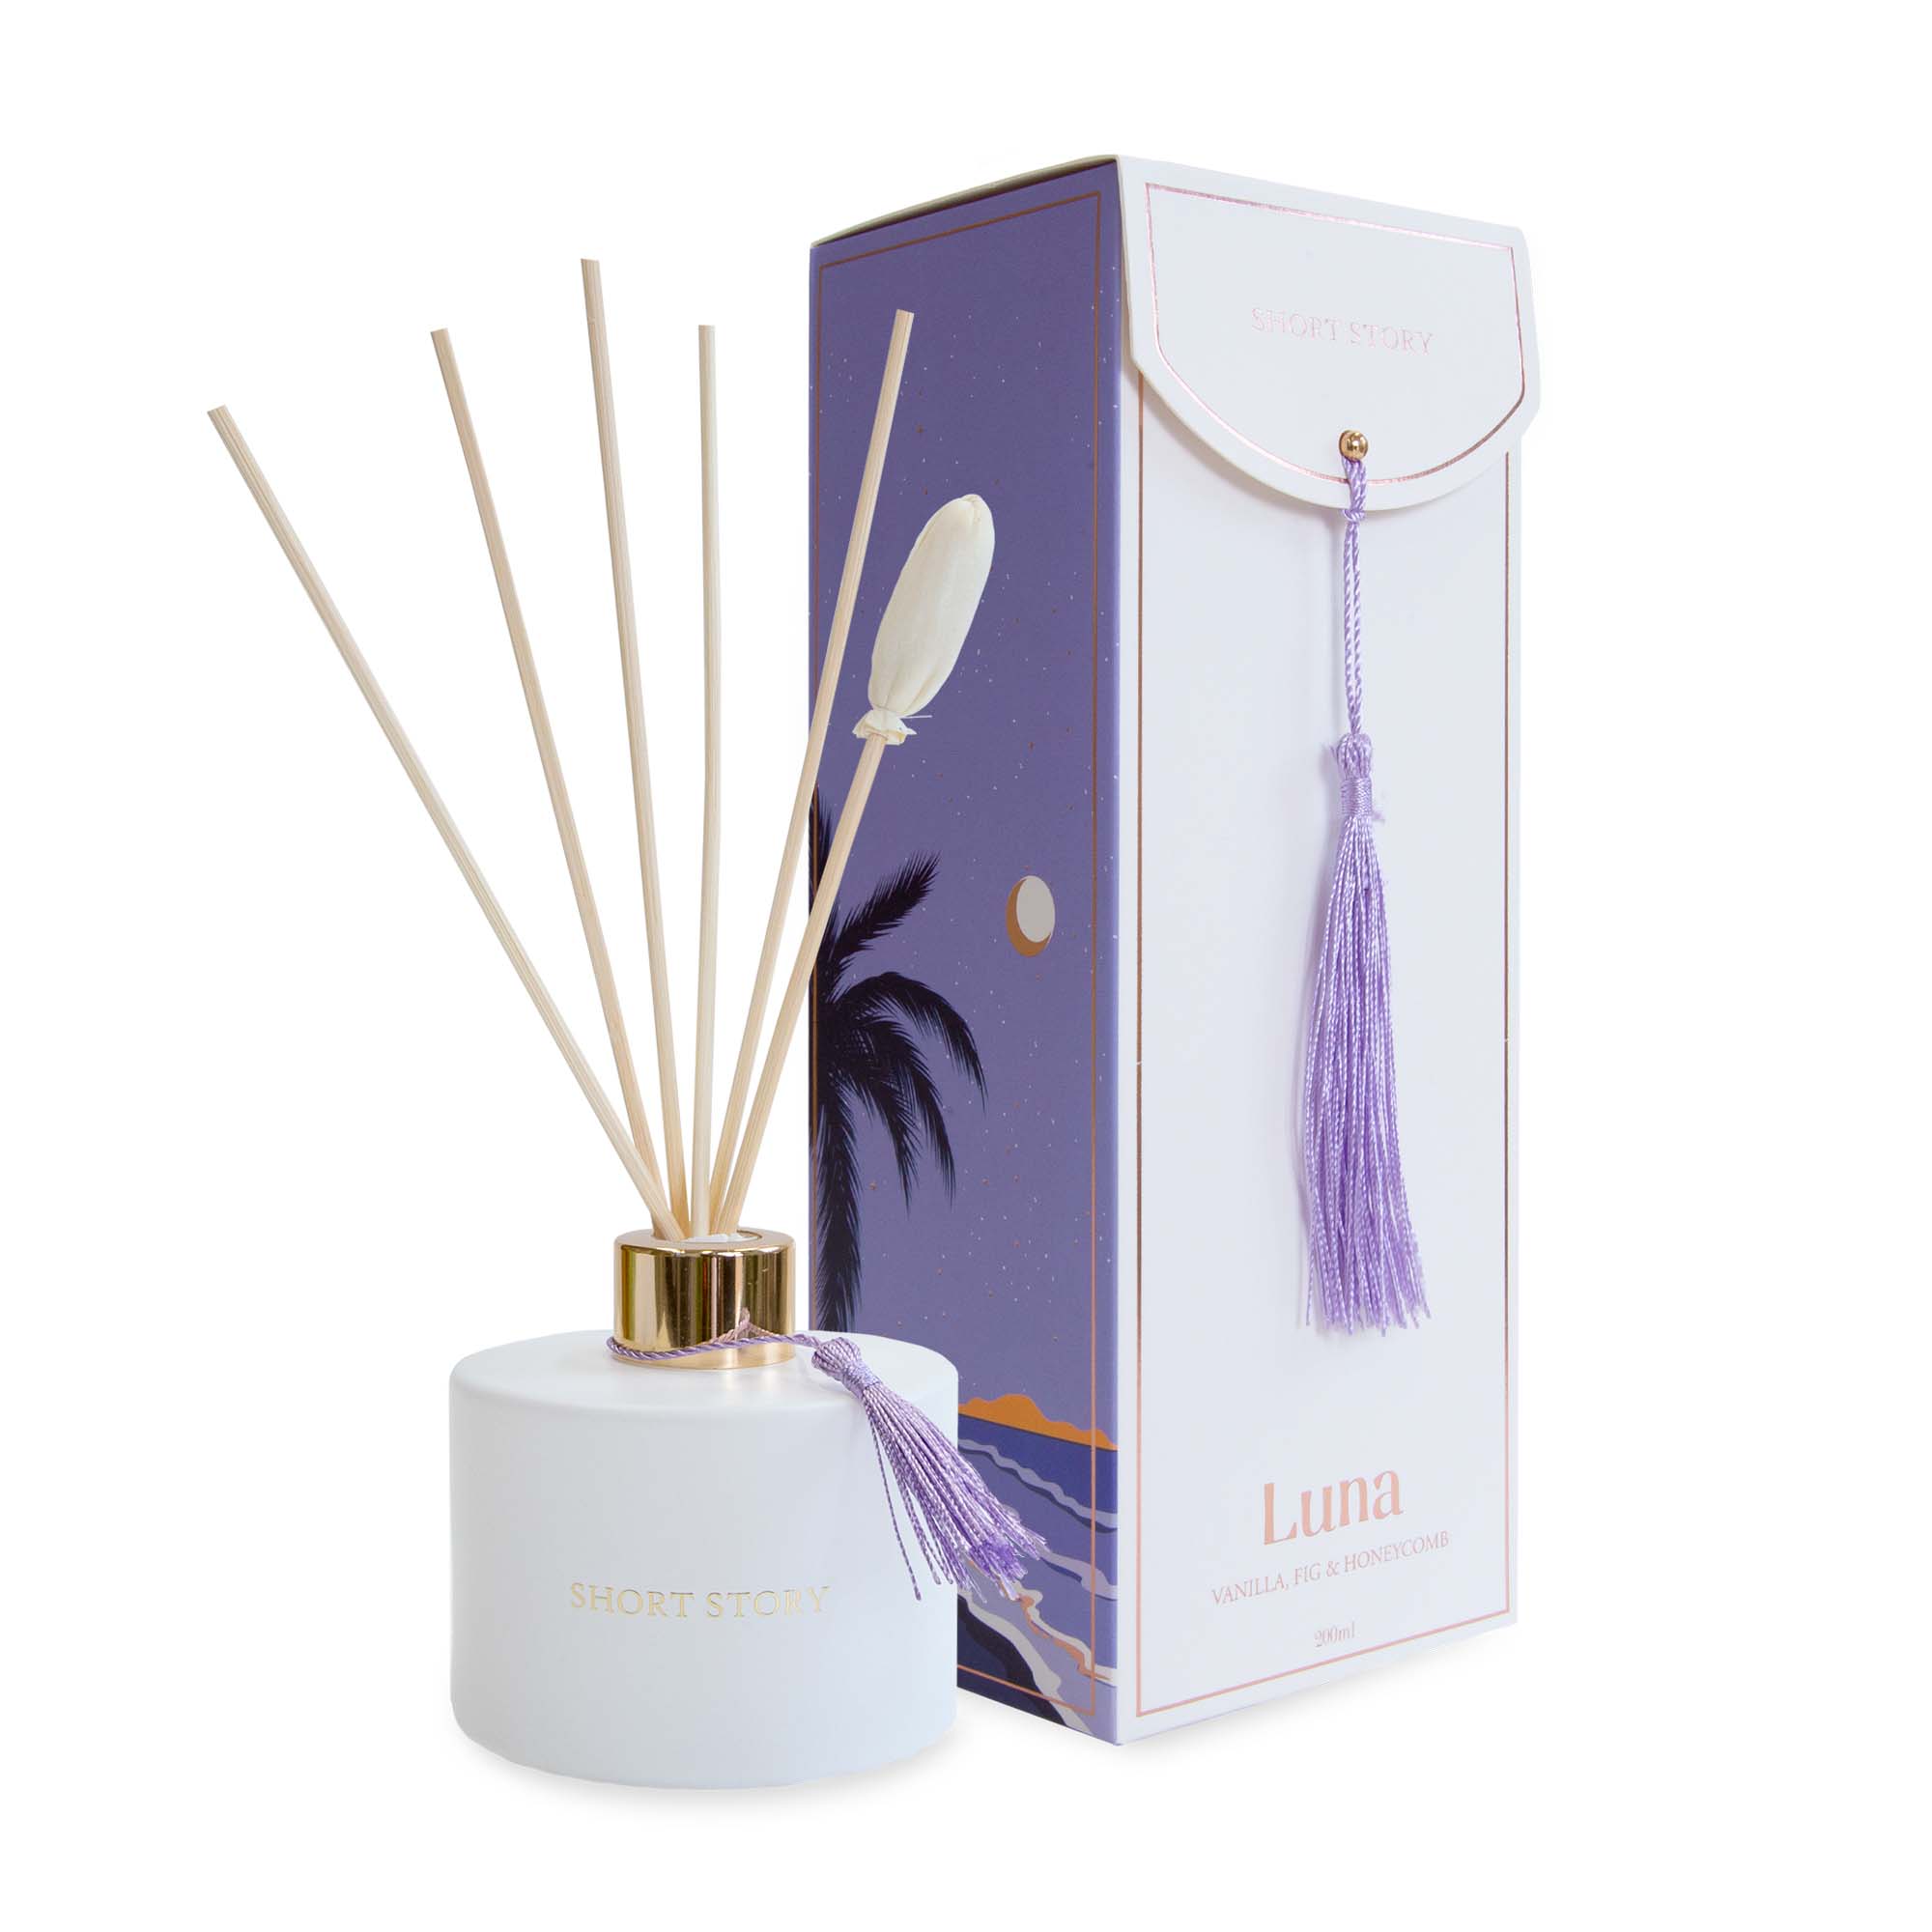 Signature Candle & Diffuser Pack – Short Story